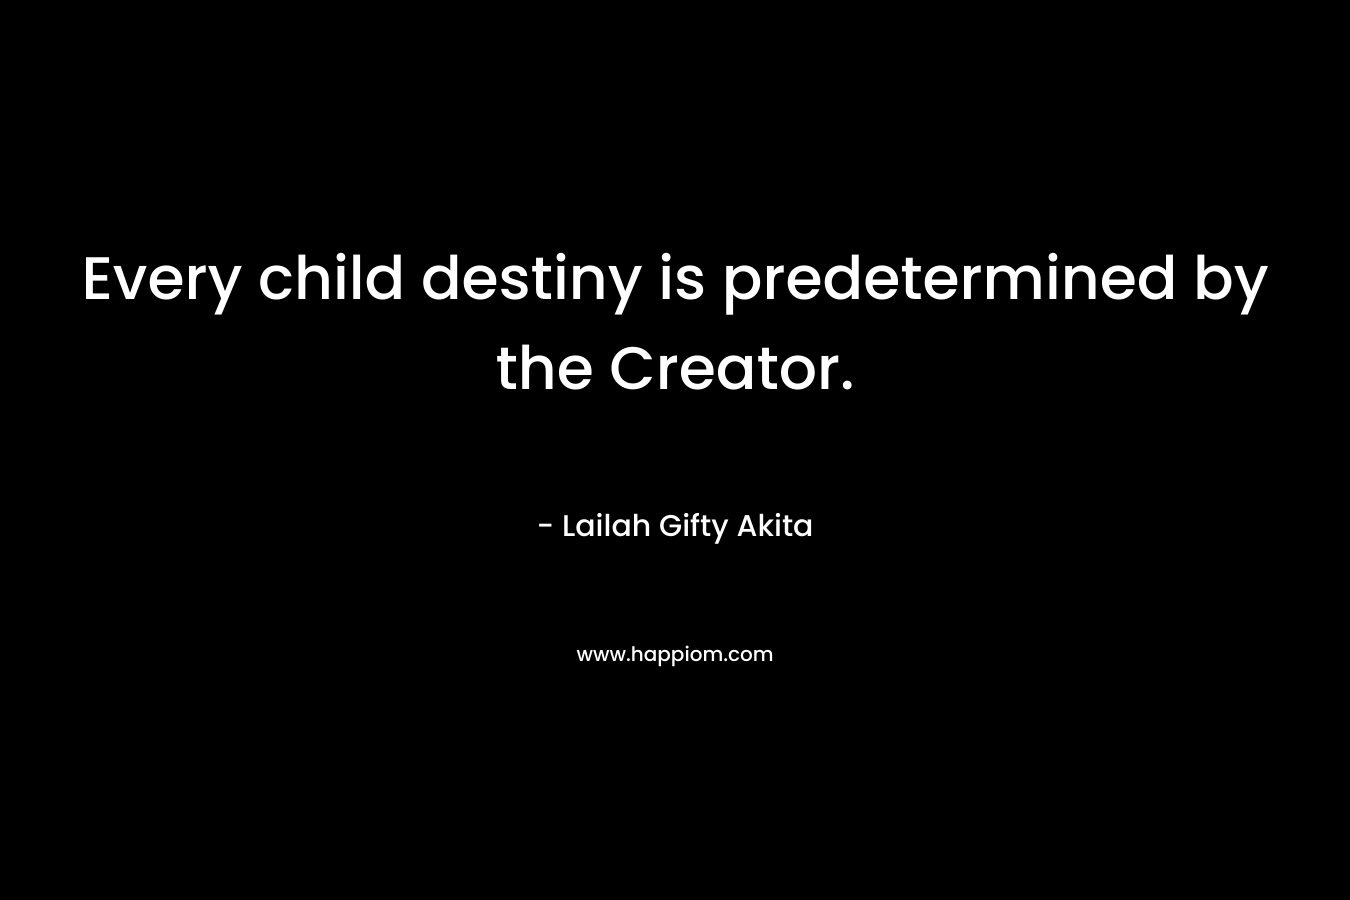 Every child destiny is predetermined by the Creator.